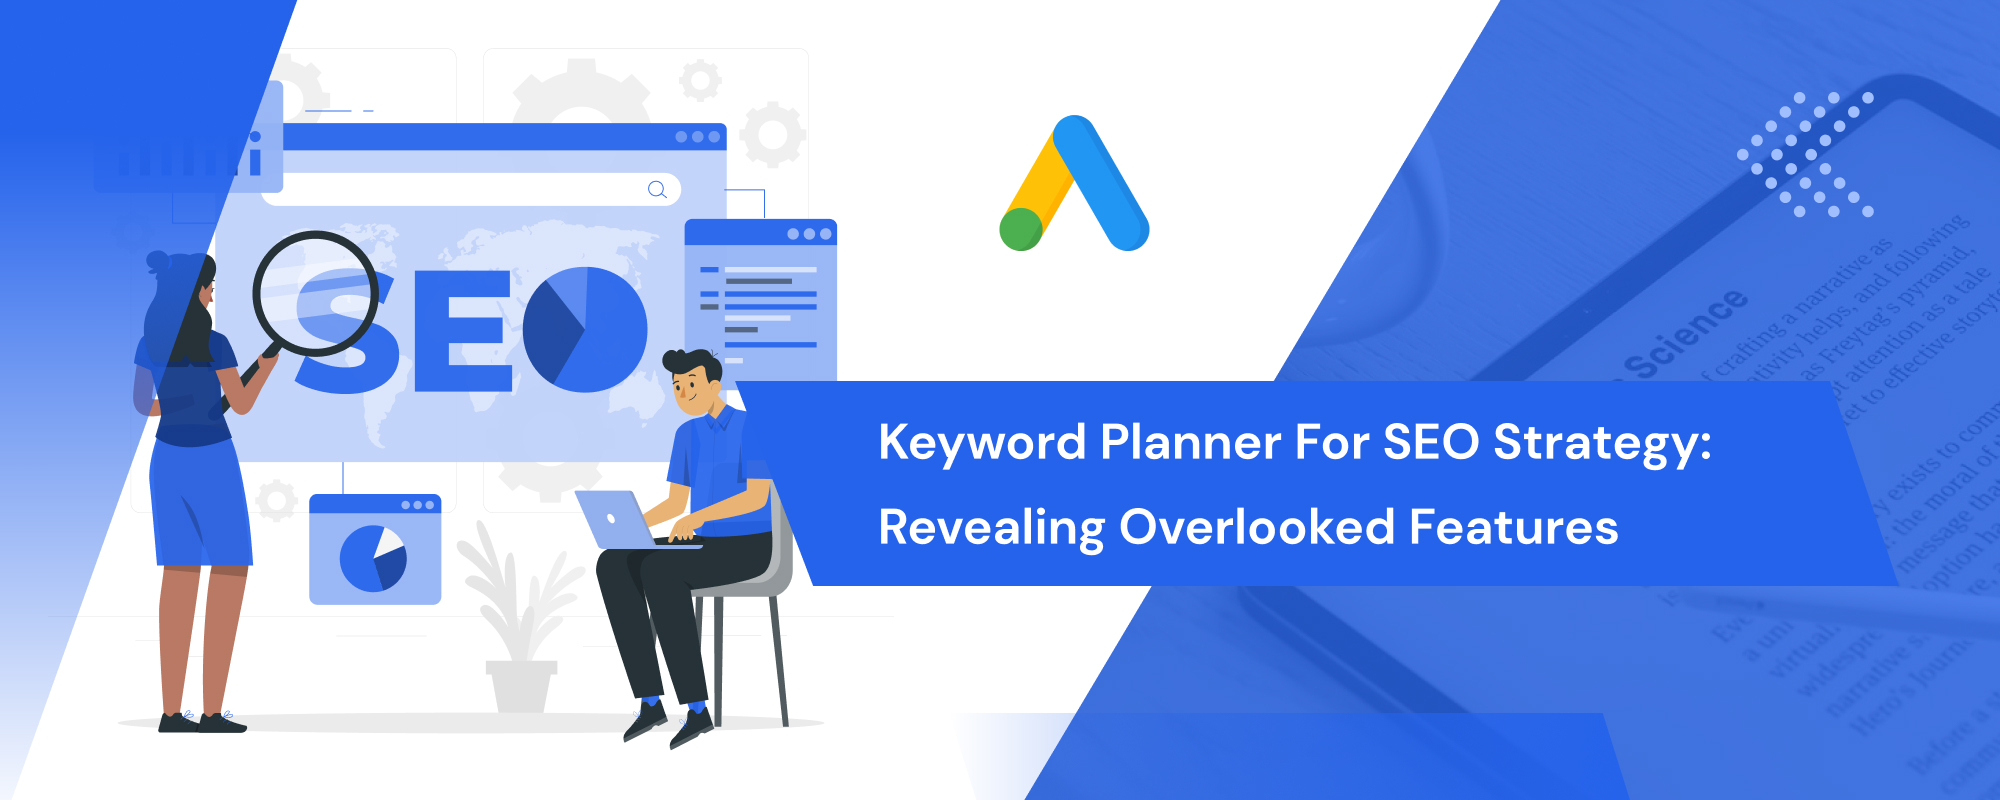 Keyword Planner for SEO Strategy: Revealing Overlooked Features